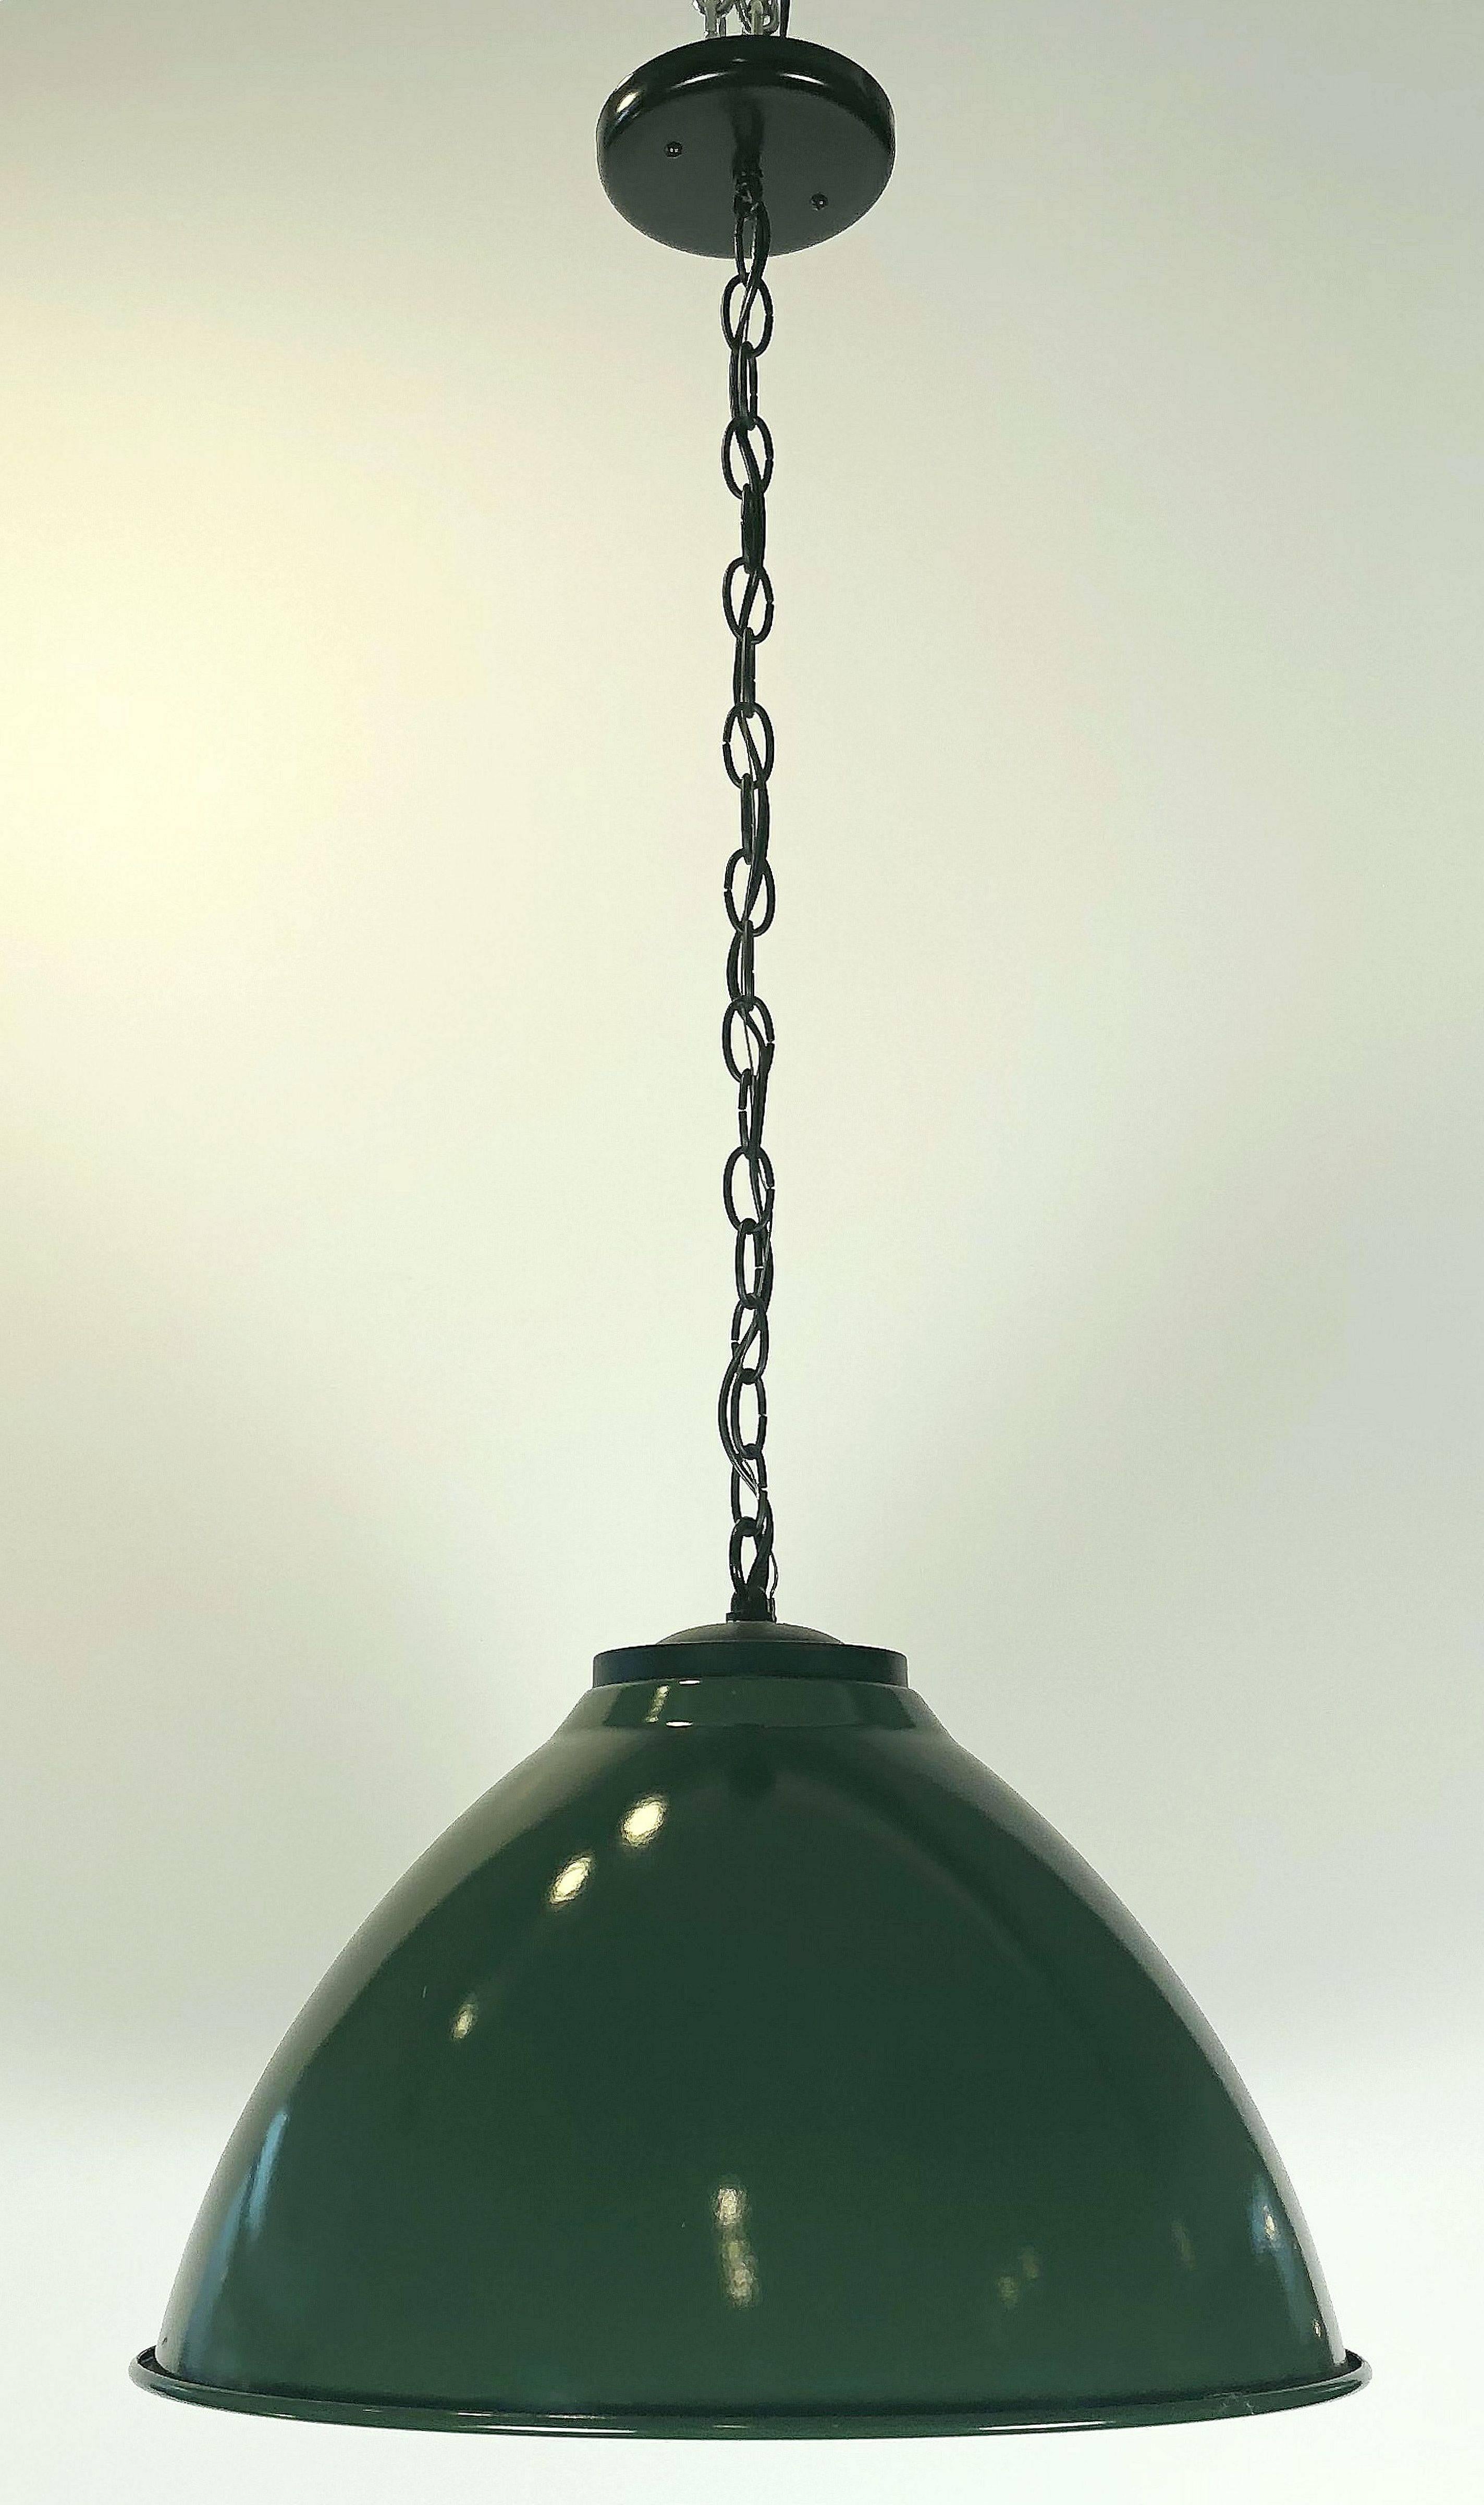 Two green enameled tole industrial hanging (fixture) lamps or lanterns from England, each one featuring a factory sized dome metal shade. 
Makes for a unique vintage machine style or modernist chandelier. 

Measures: Diameter 18 1/4 inches

U.S.